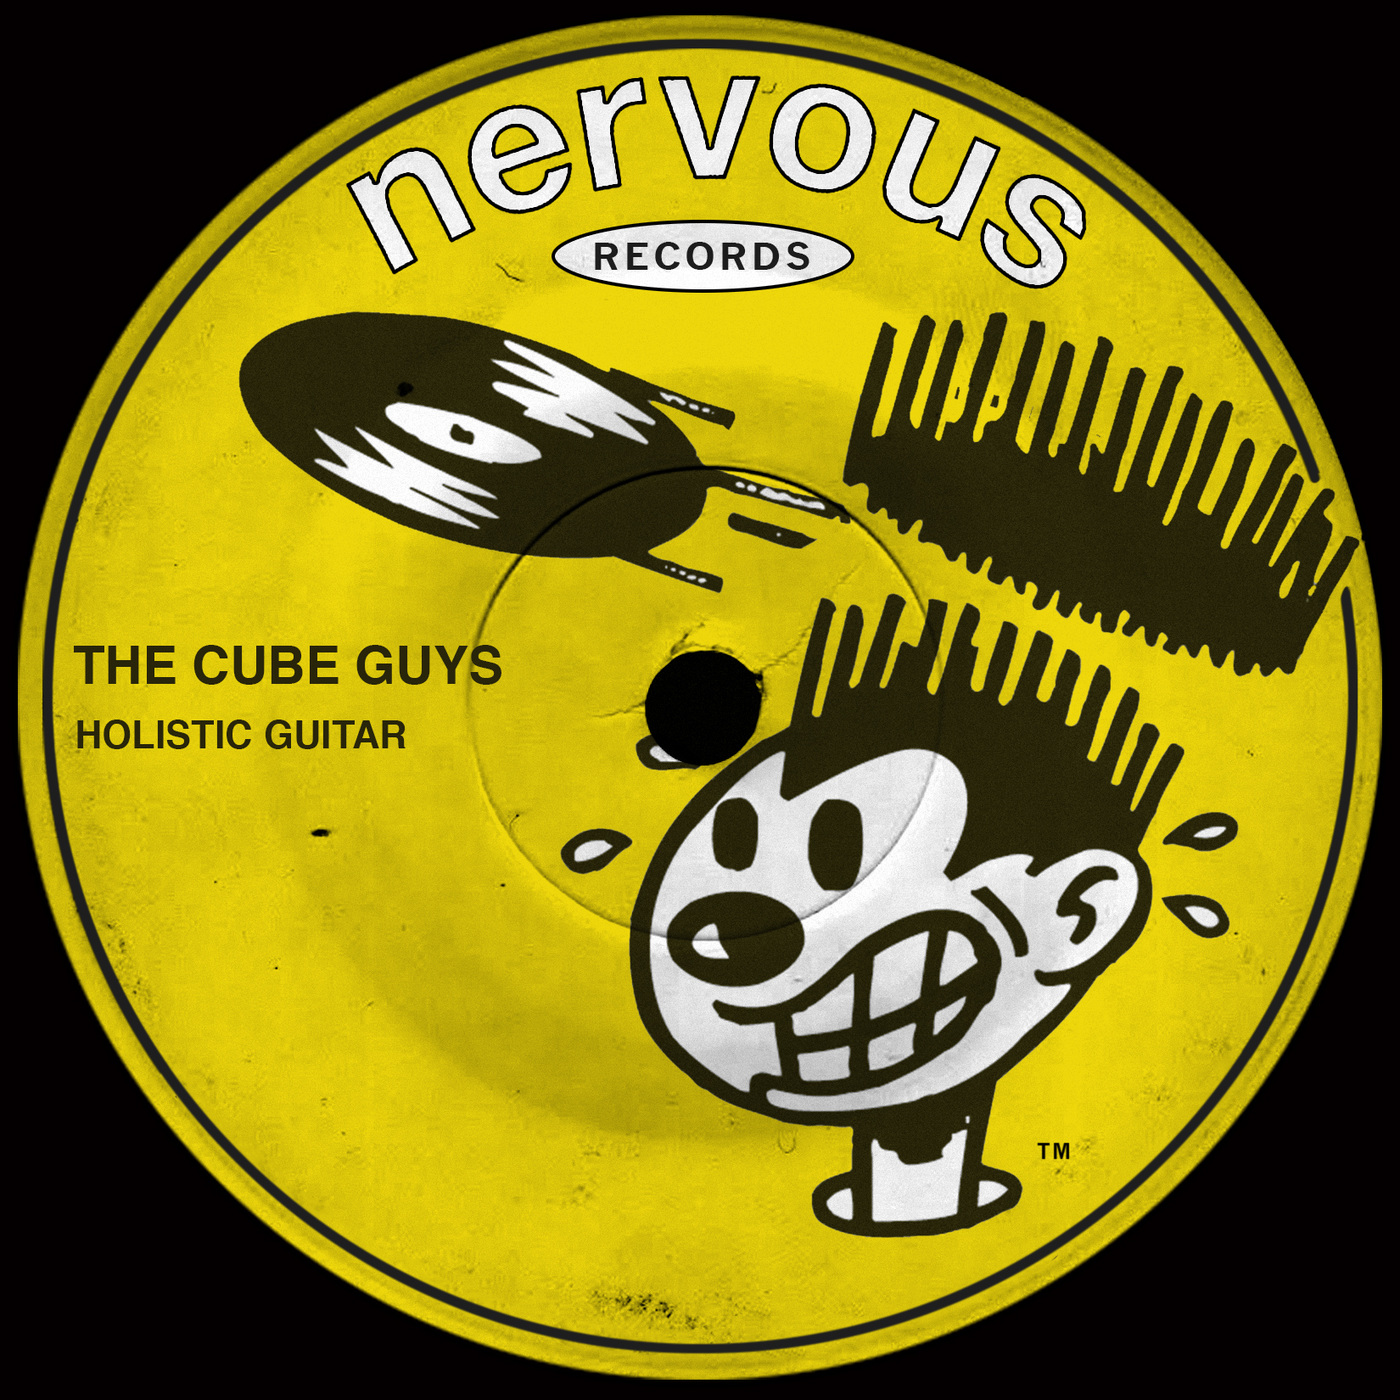 The Cube Guys - Holistic Guitar / Nervous Records